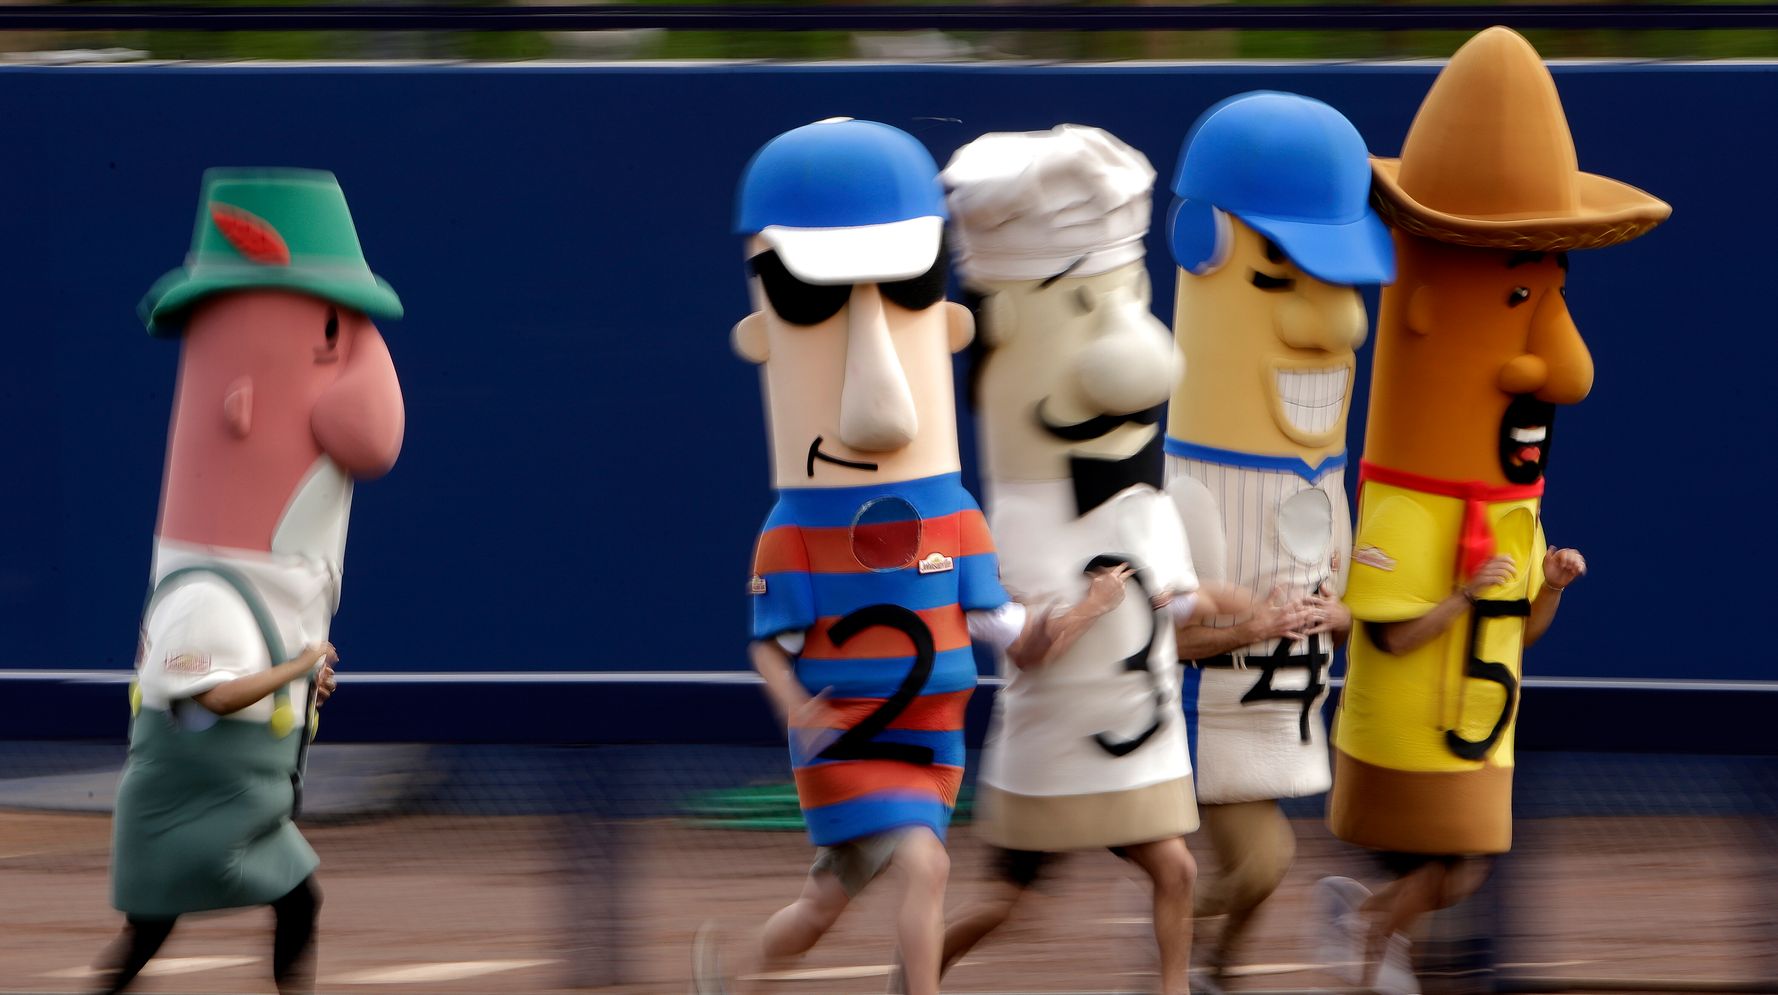 Wisconsin GOP Deeply Worried About Racing Sausages At Polling